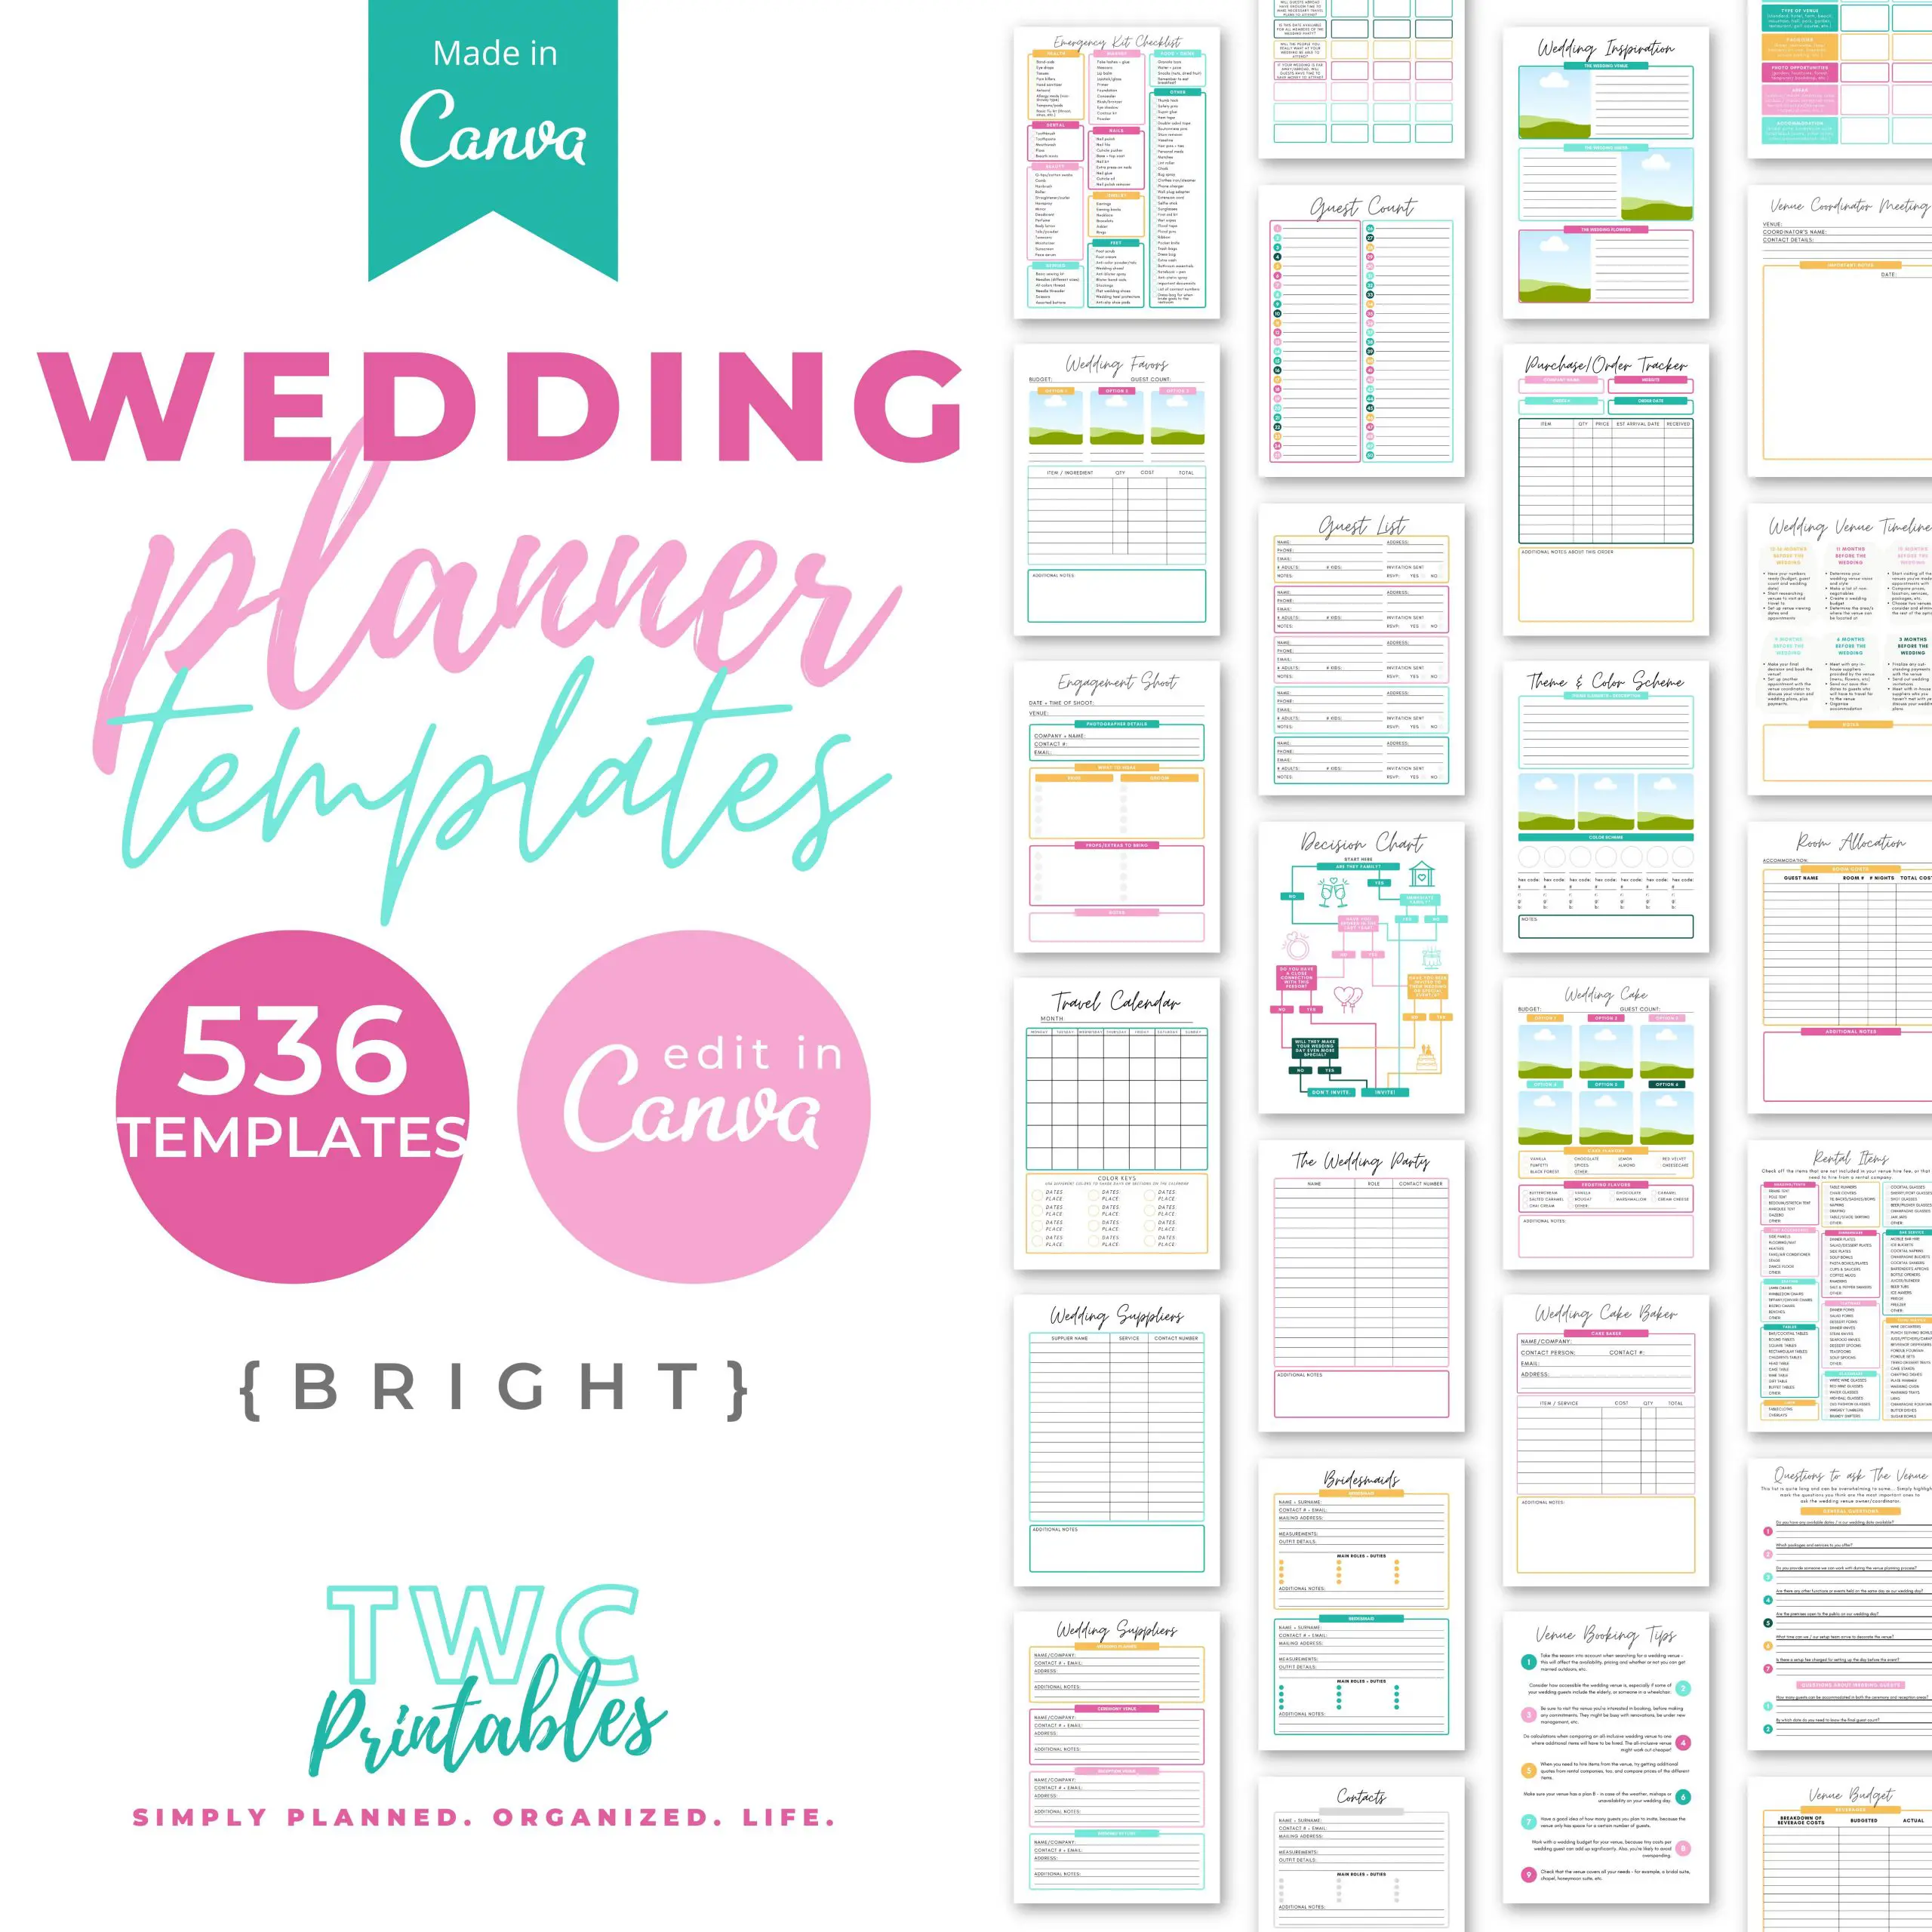 Bright wedding planner templates for Canva - The Wedding Shop - The Wedding Club